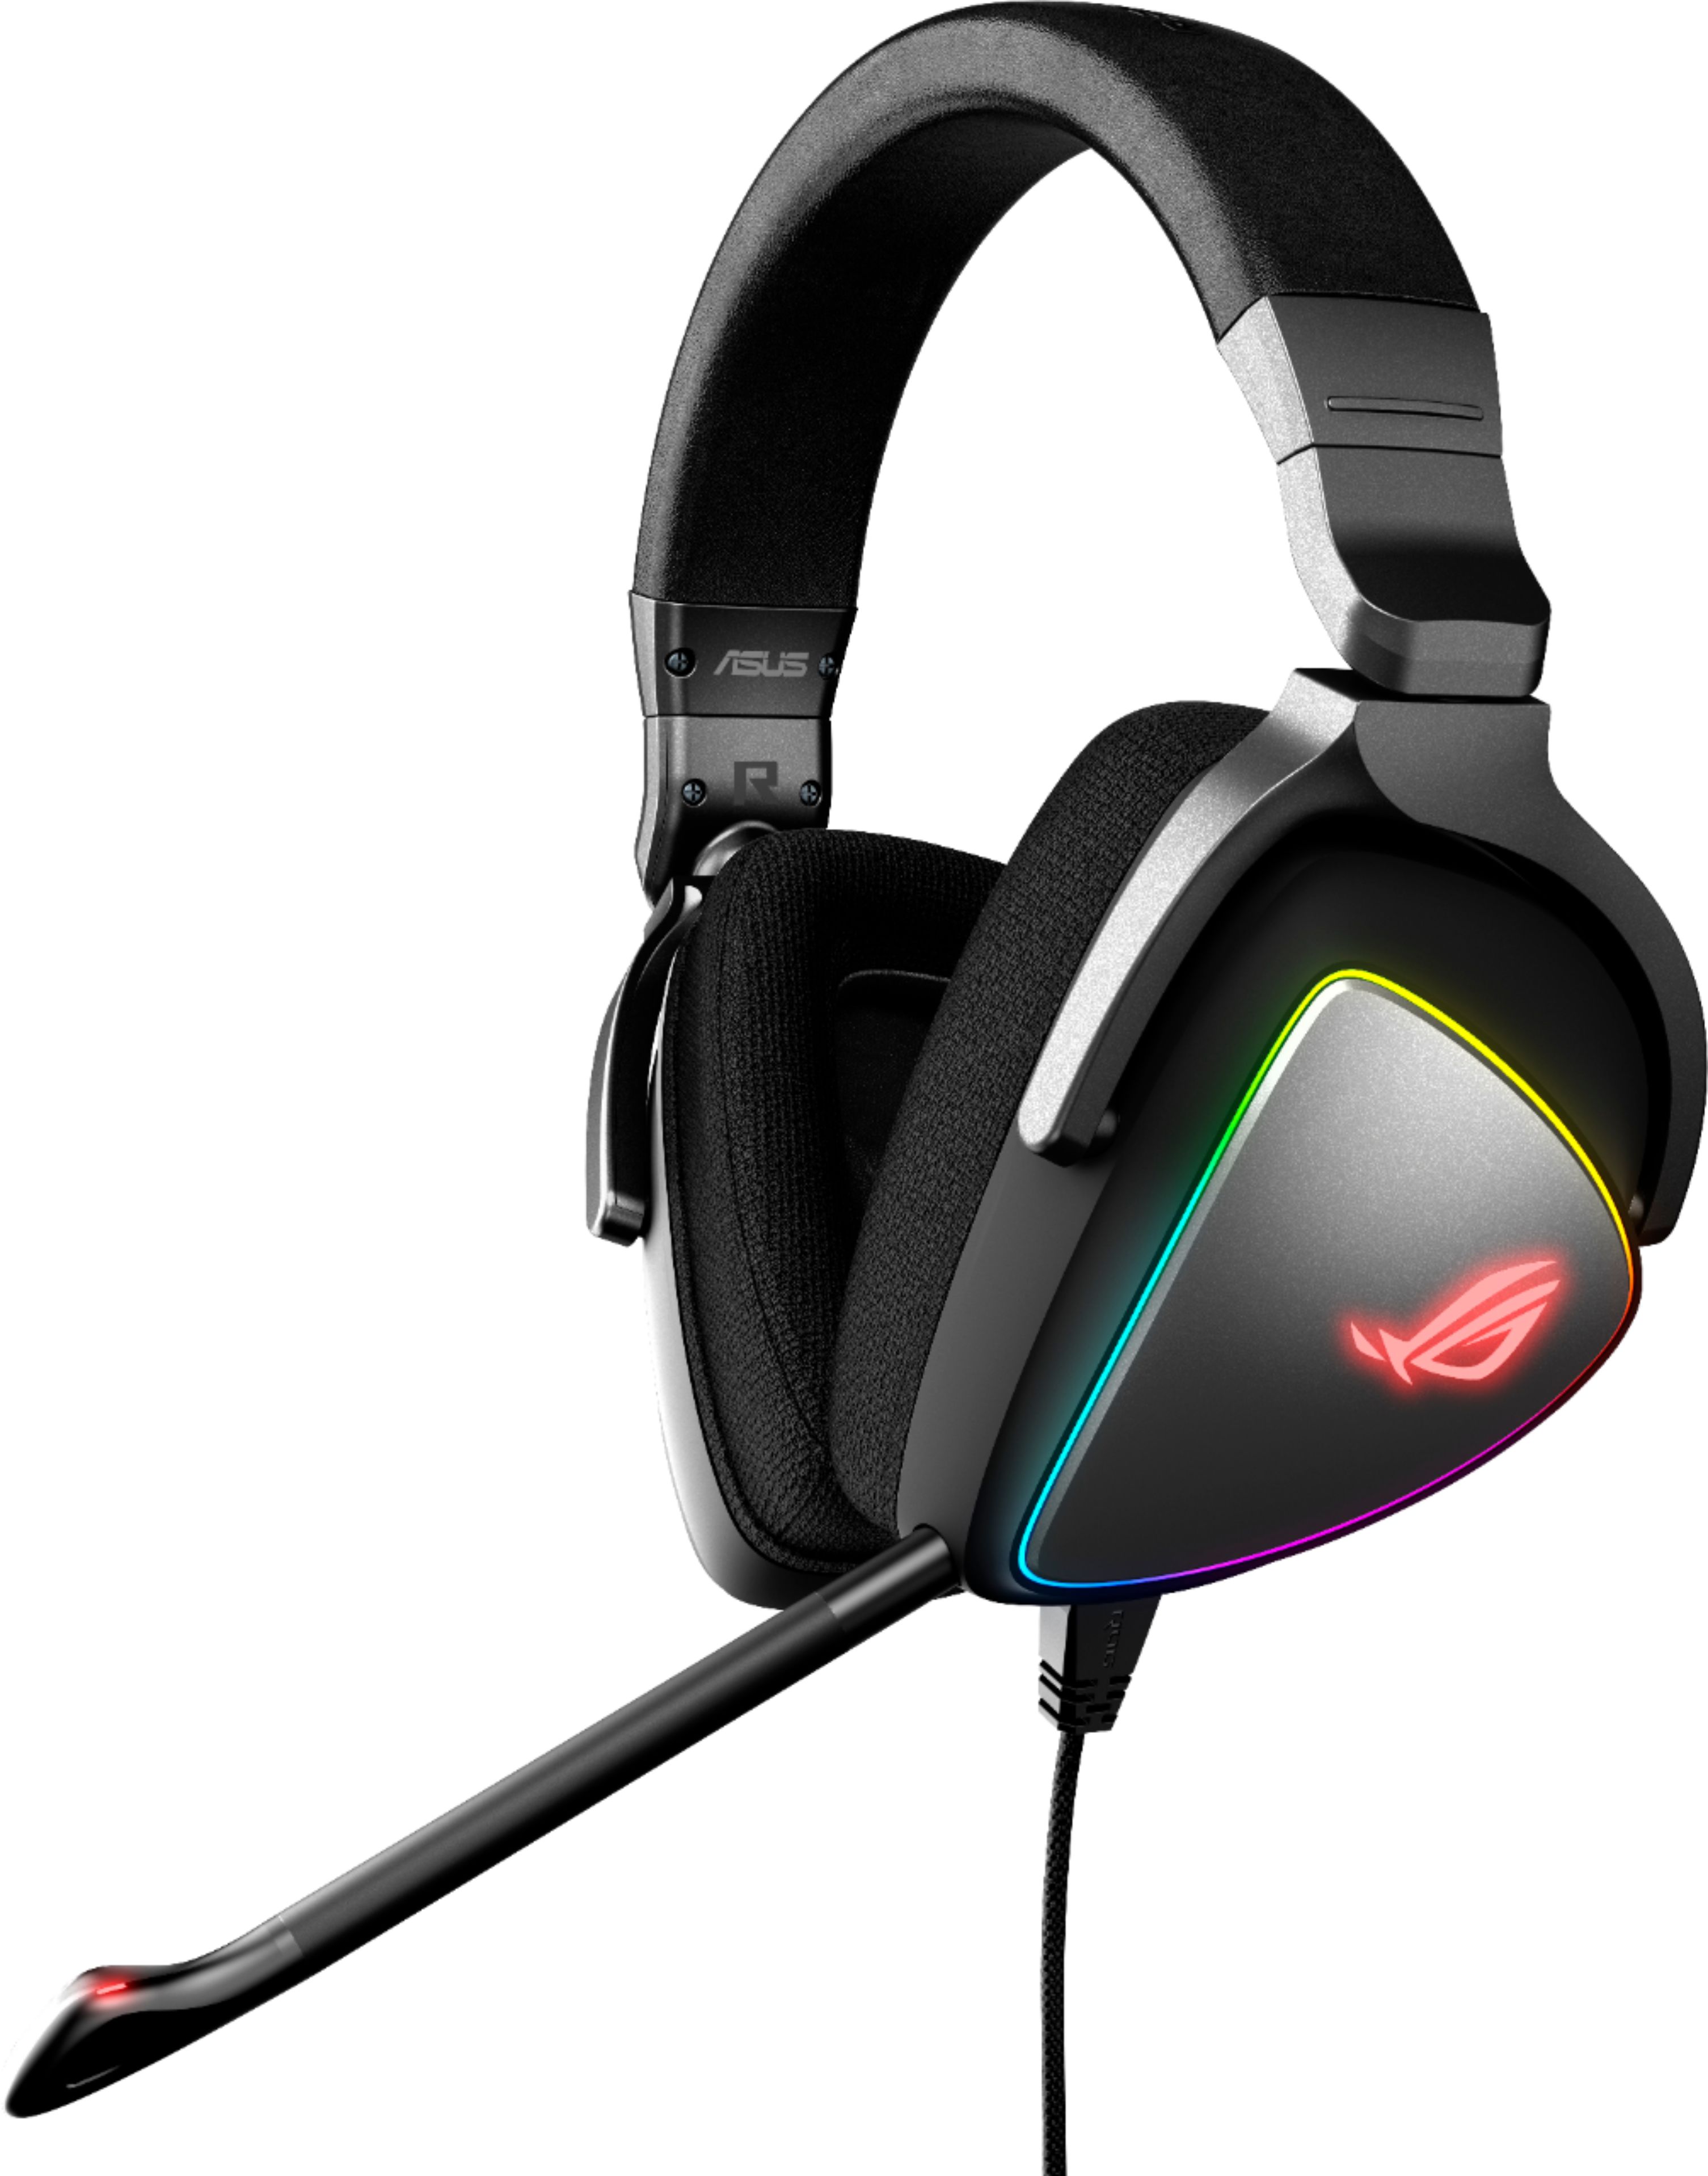 bewaker aanval Mam ASUS ROG Delta RGB Wired Stereo Gaming Headset for PC, Mac, PS4, Nintendo  Switch and Mobile Devices Black ROG DELTA - Best Buy